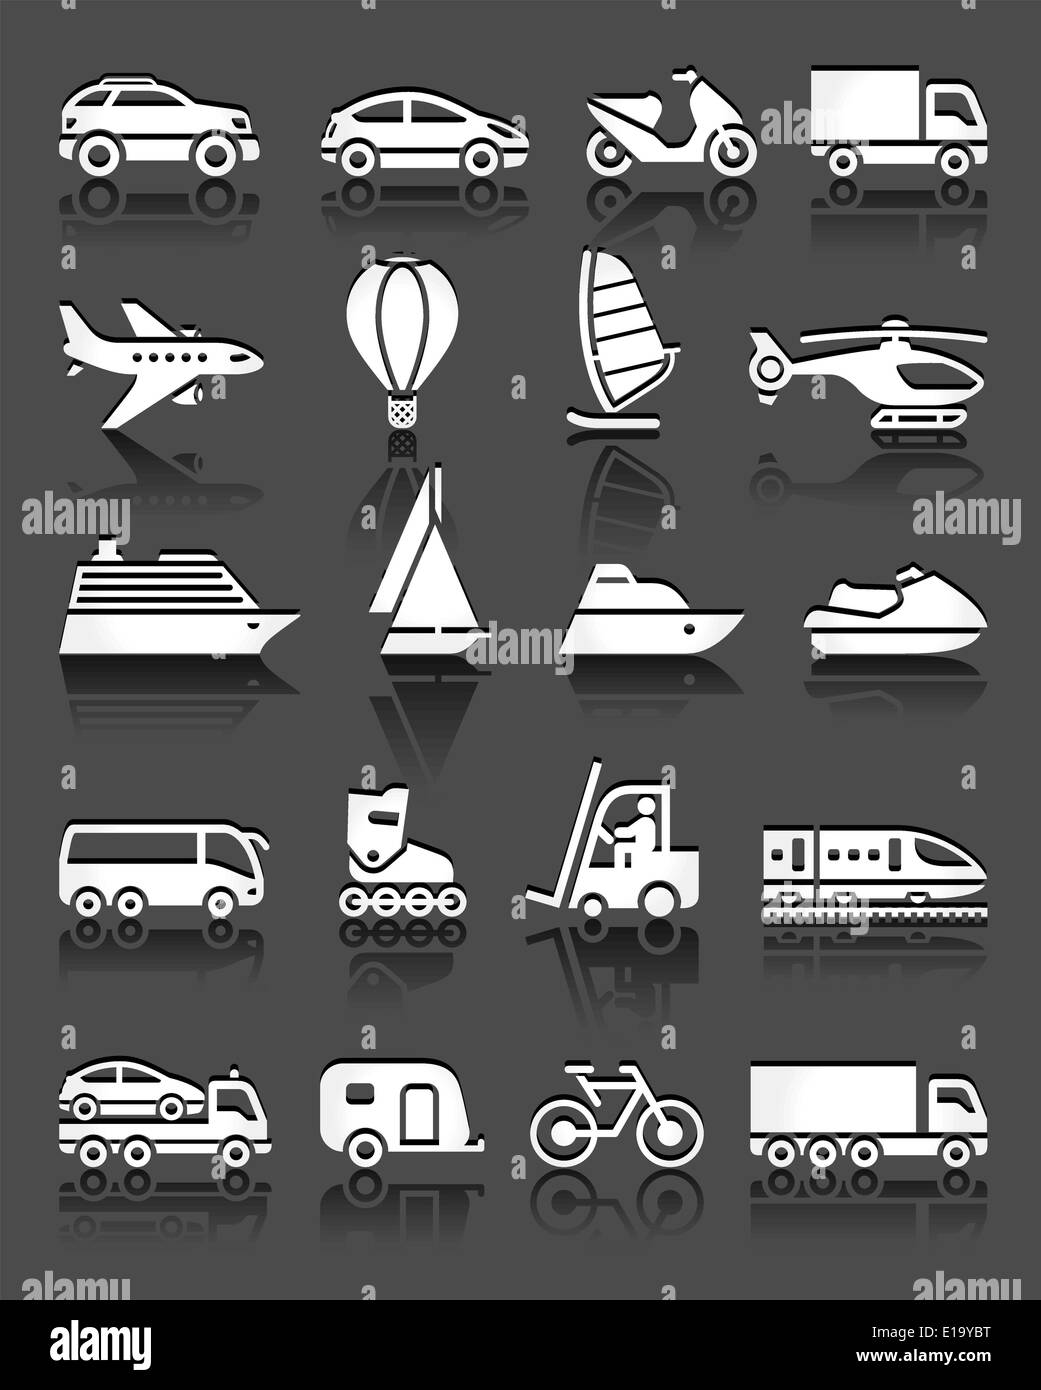 Set of simple transport icons with reflection, gray background Stock Vector